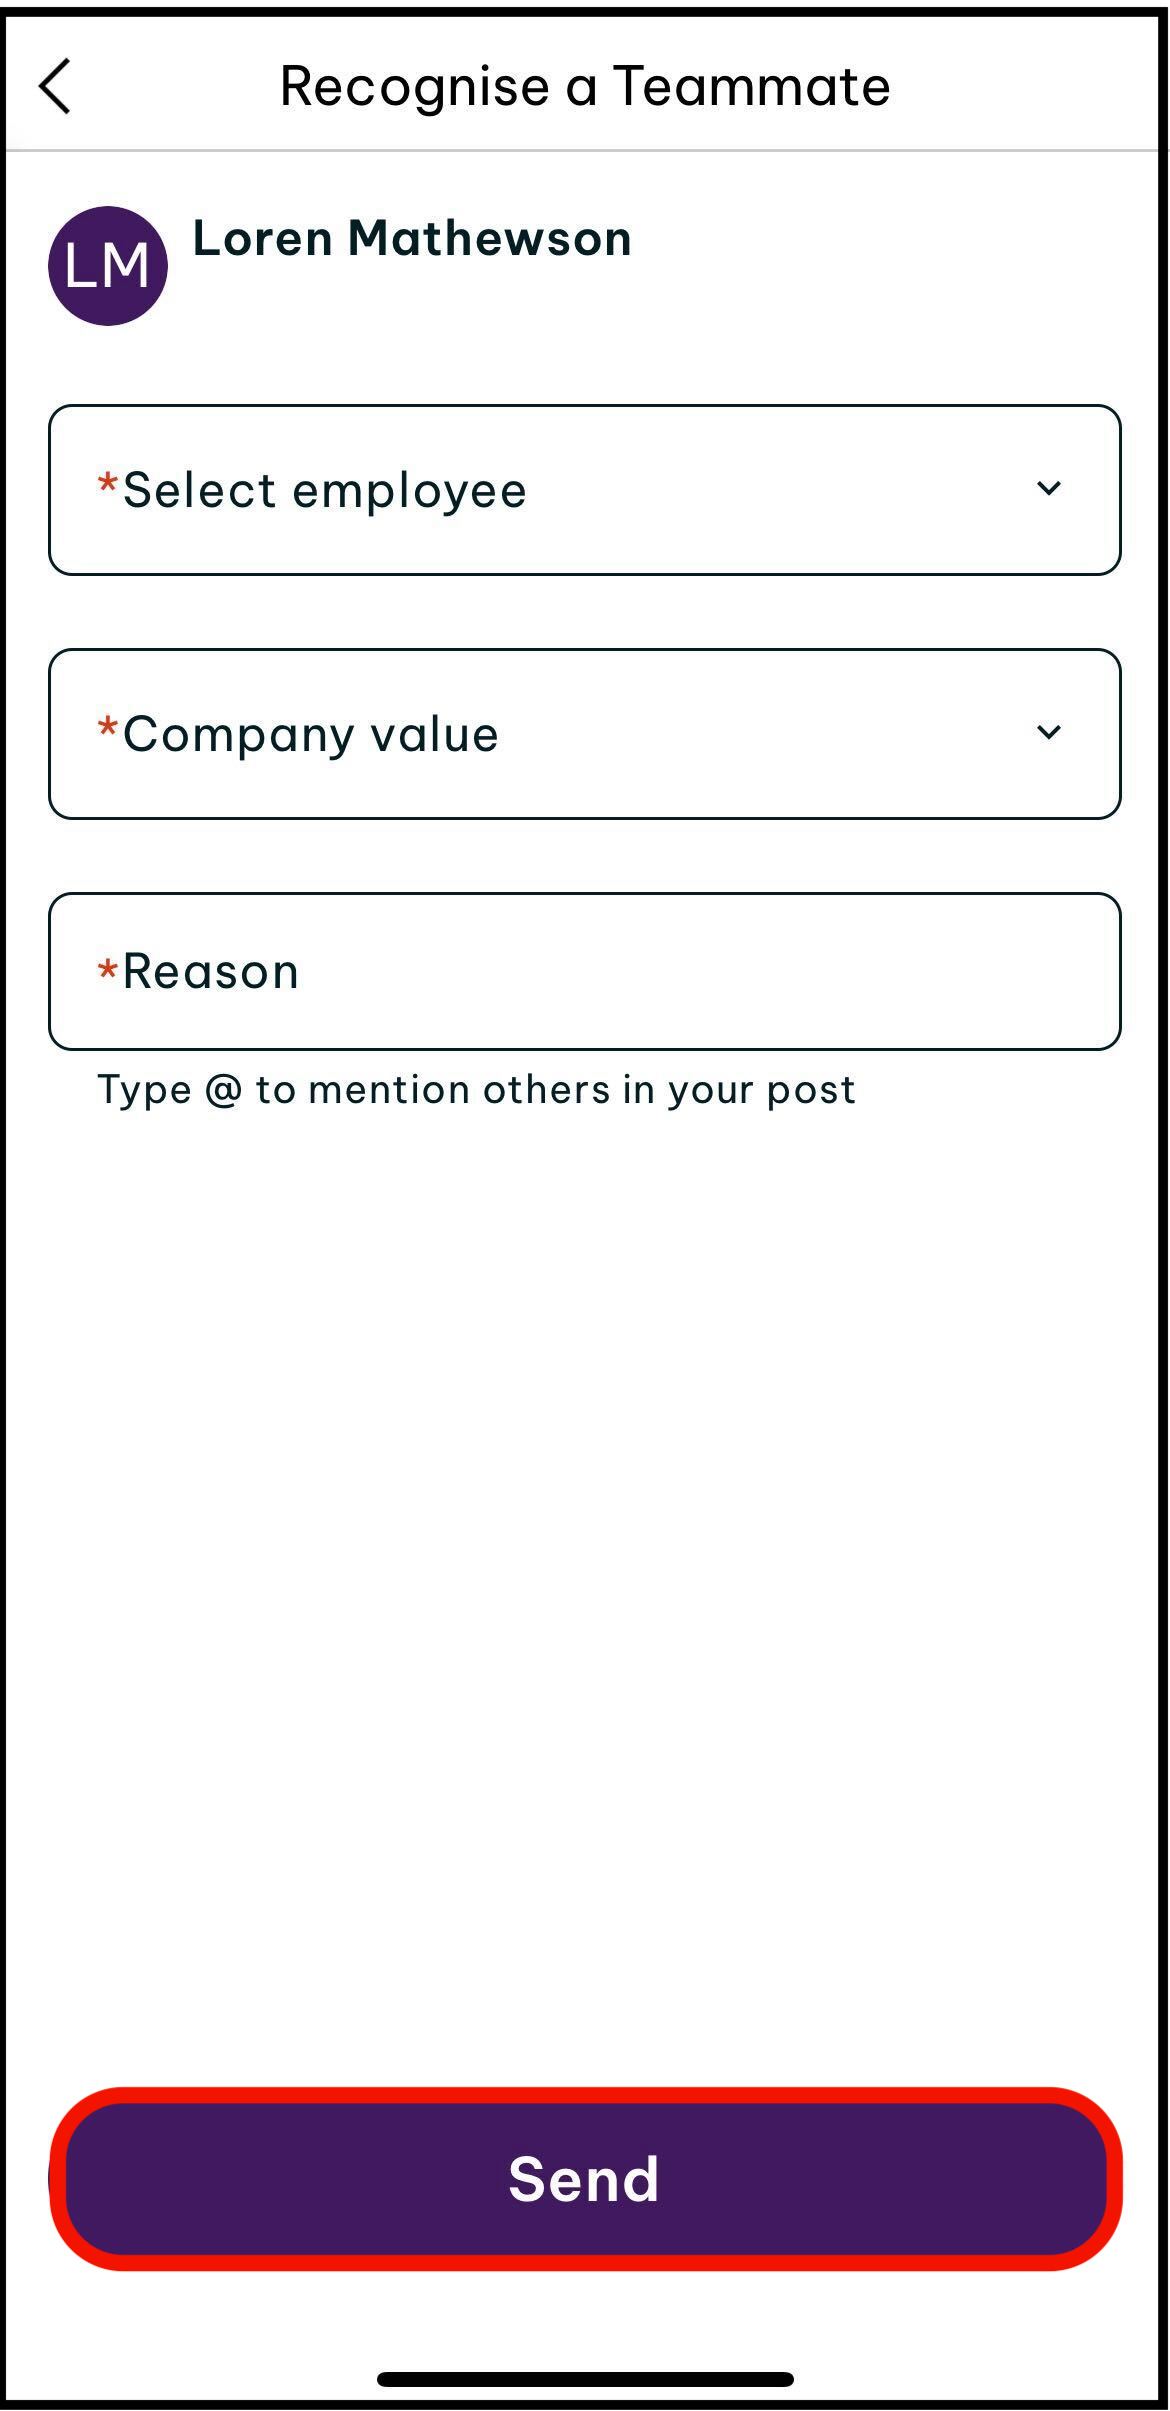 Screenshot of where to send  recognise a teammate to add to the company feed 